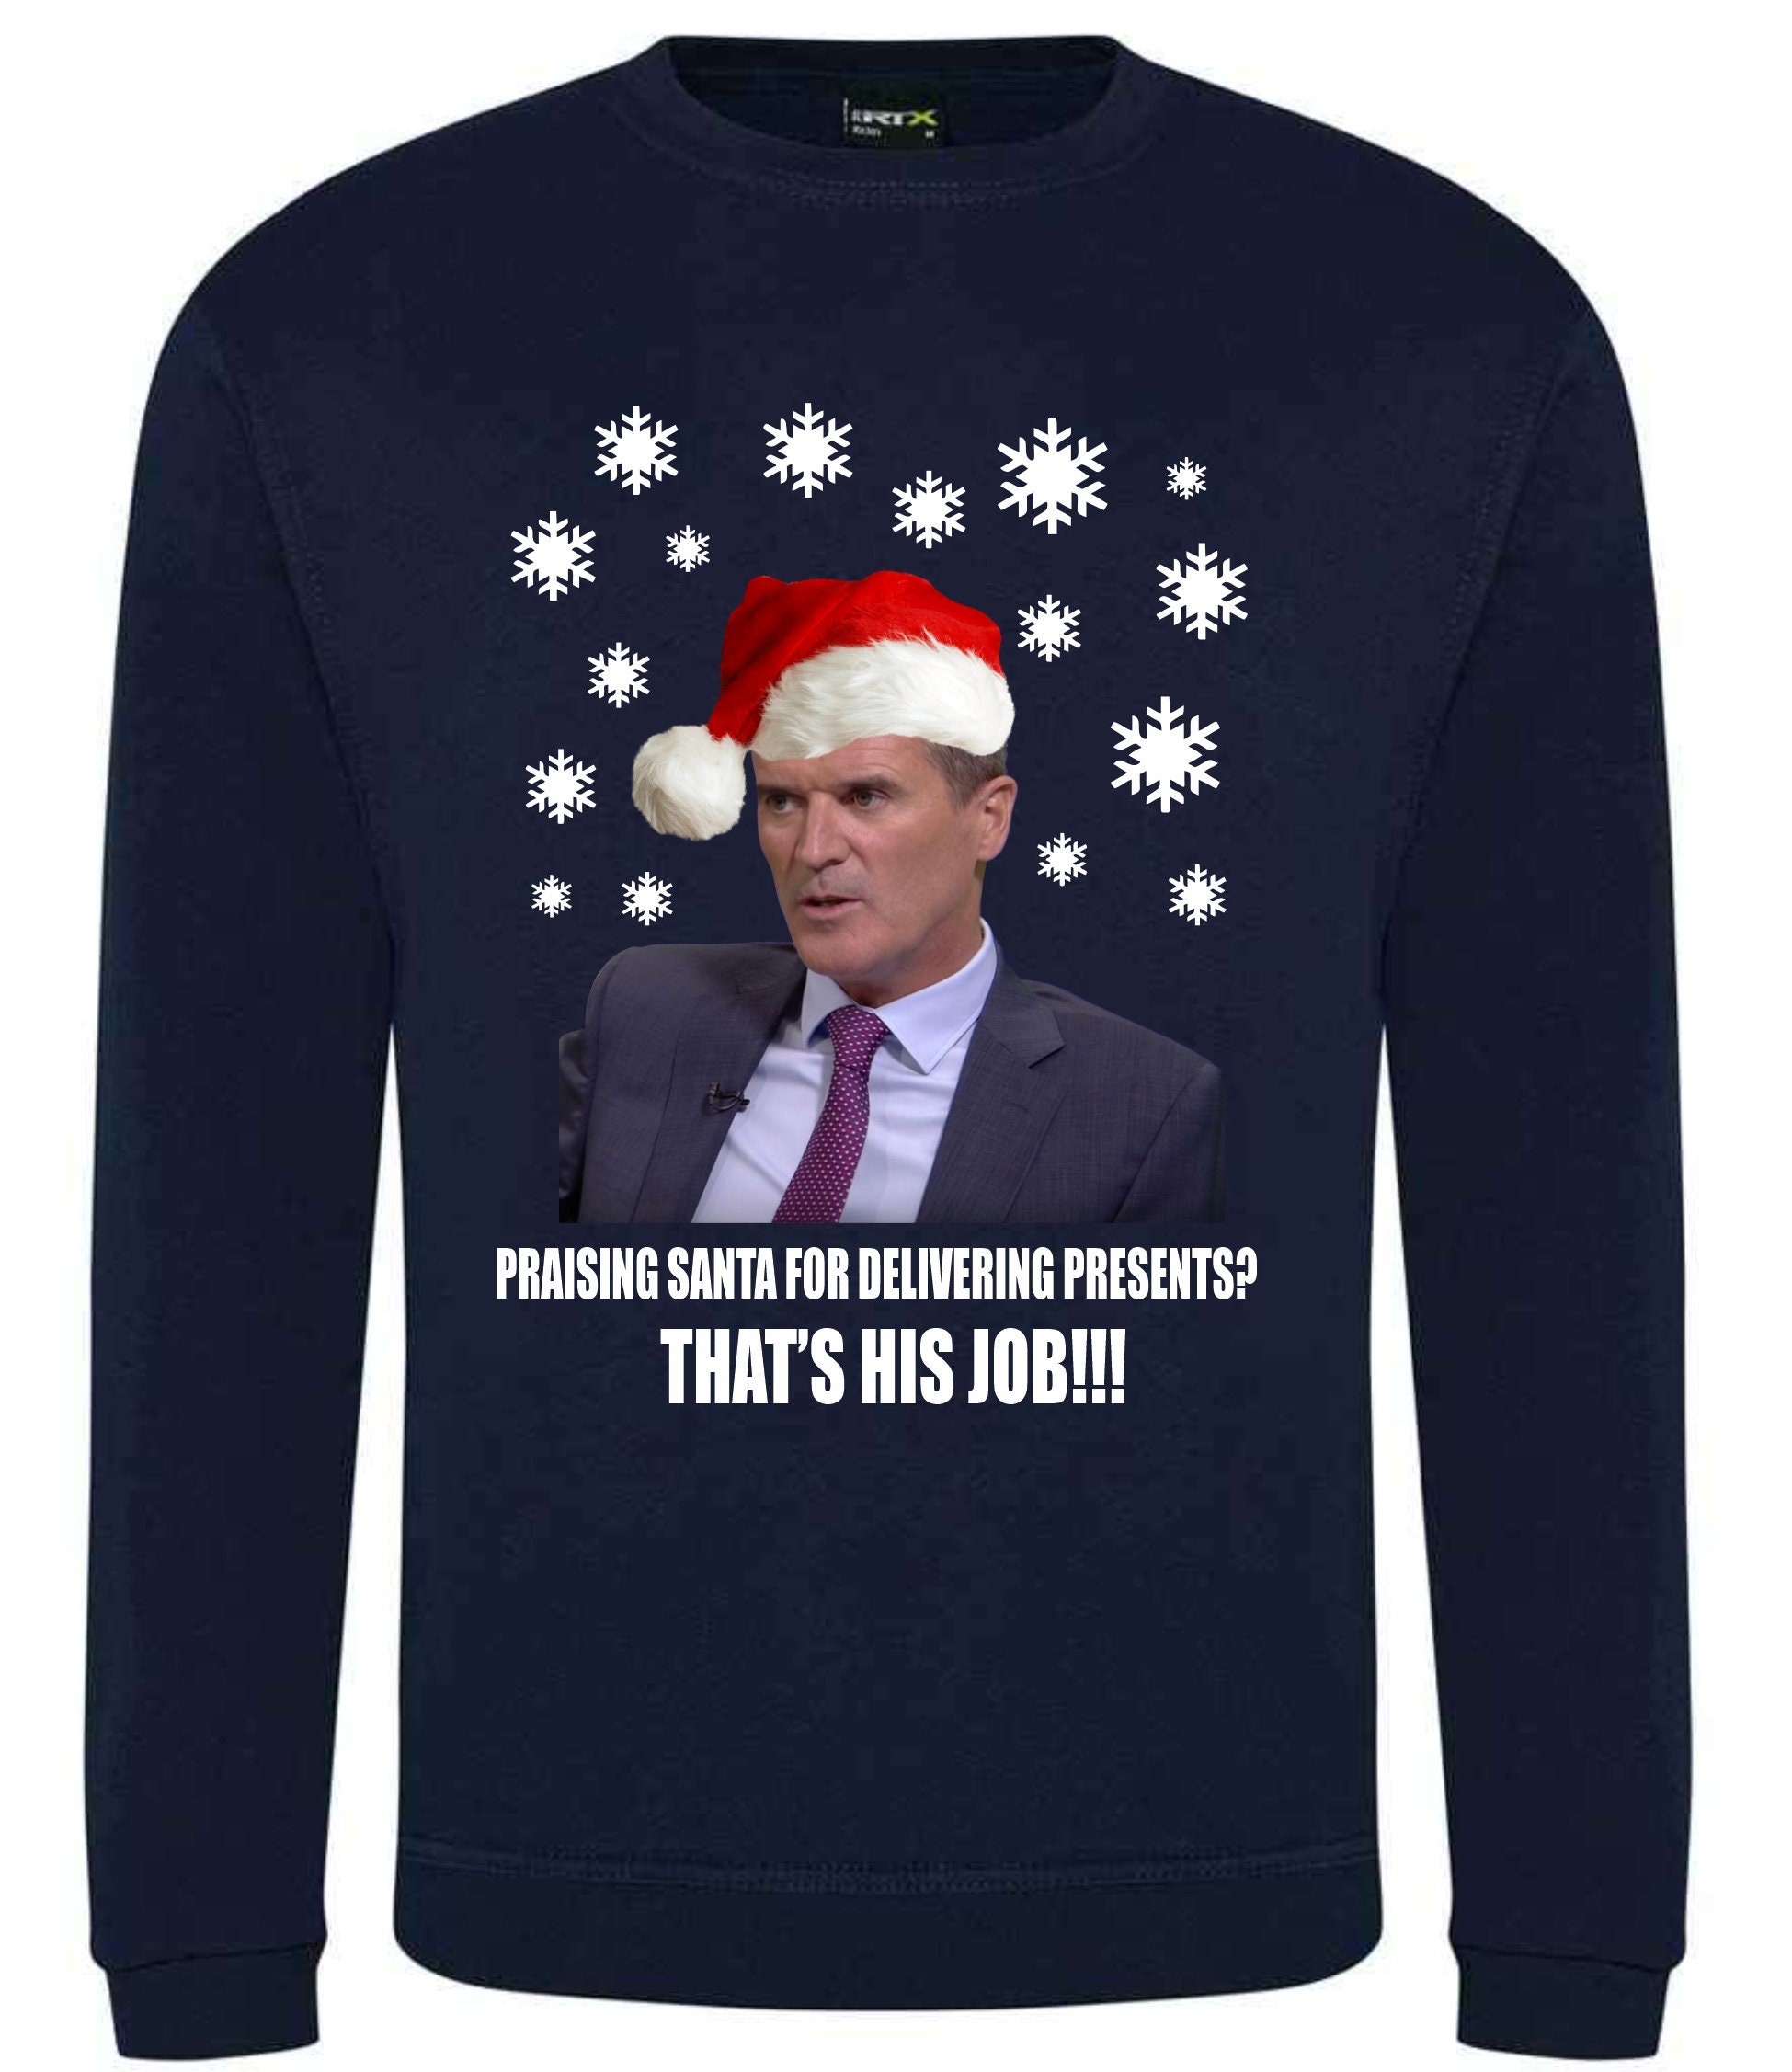 Praising Santa For Delivering Presents, That's His Job, Roy Keane Funny Christmas sweater